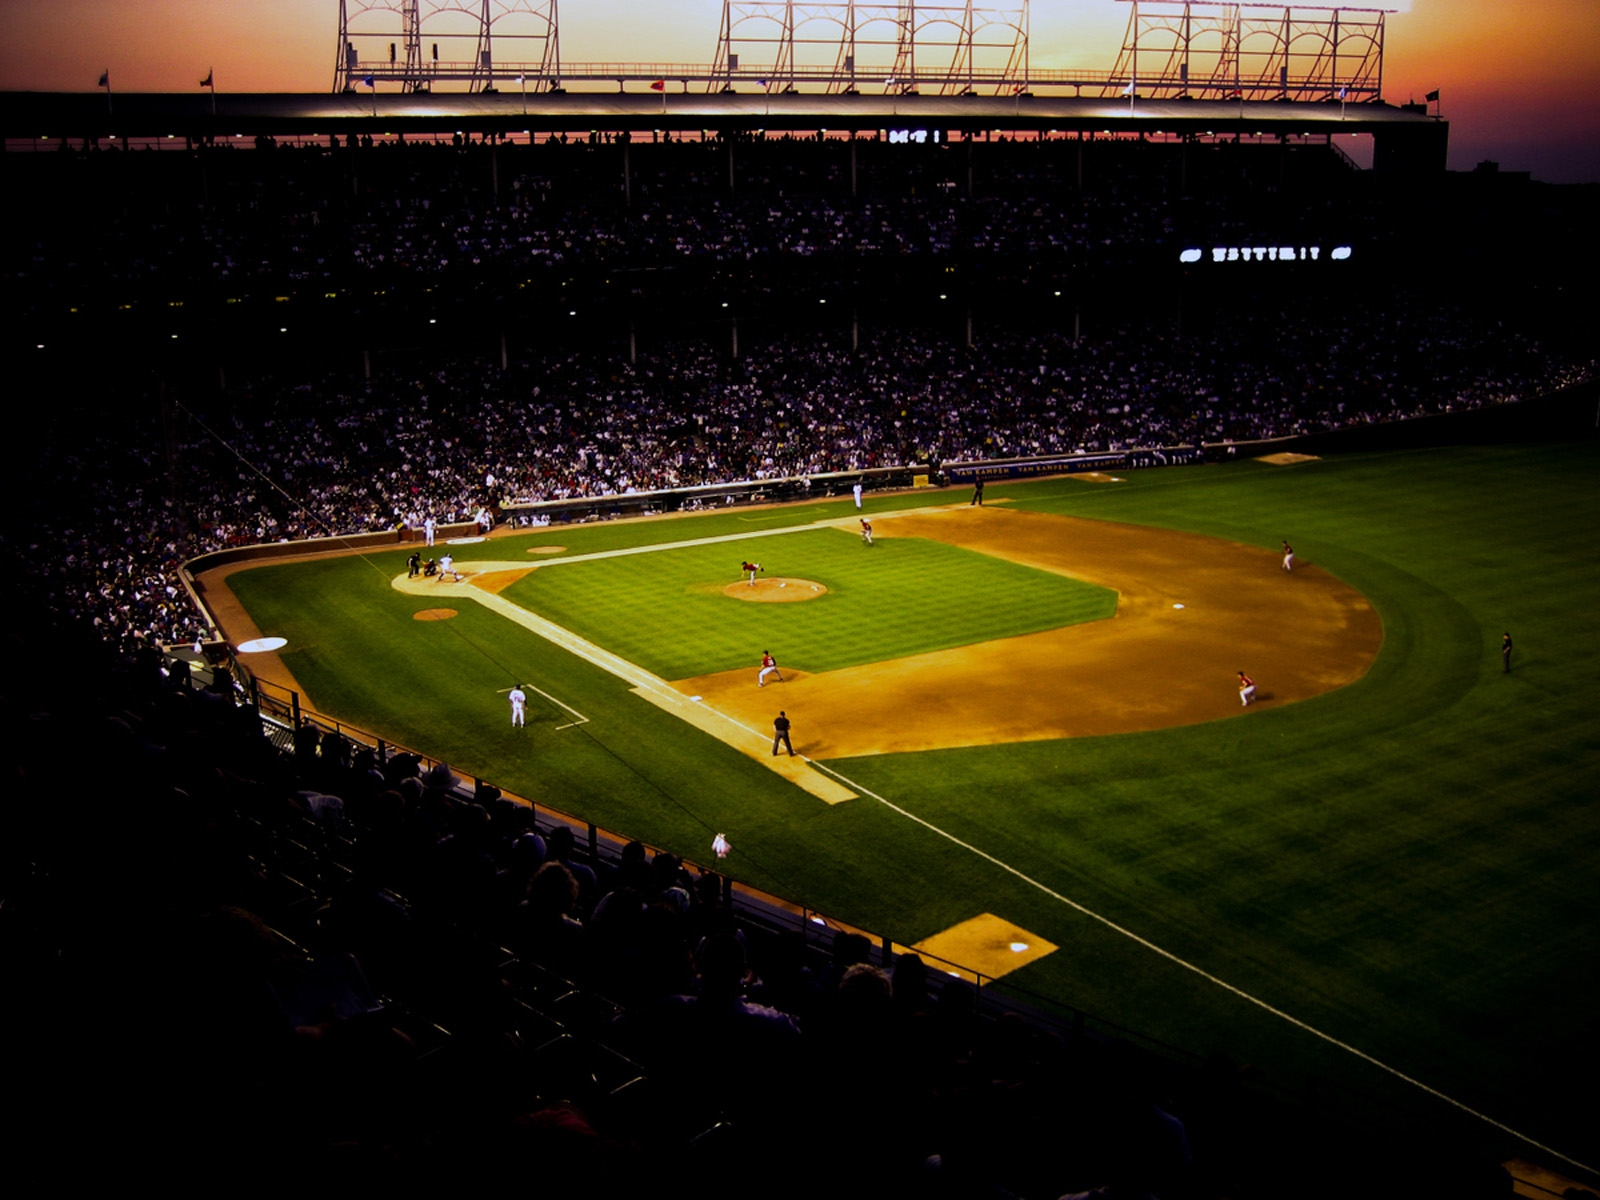 Baseball Field Wallpapers Mobile For Free Wallpaper - Baseball Field At Night - HD Wallpaper 